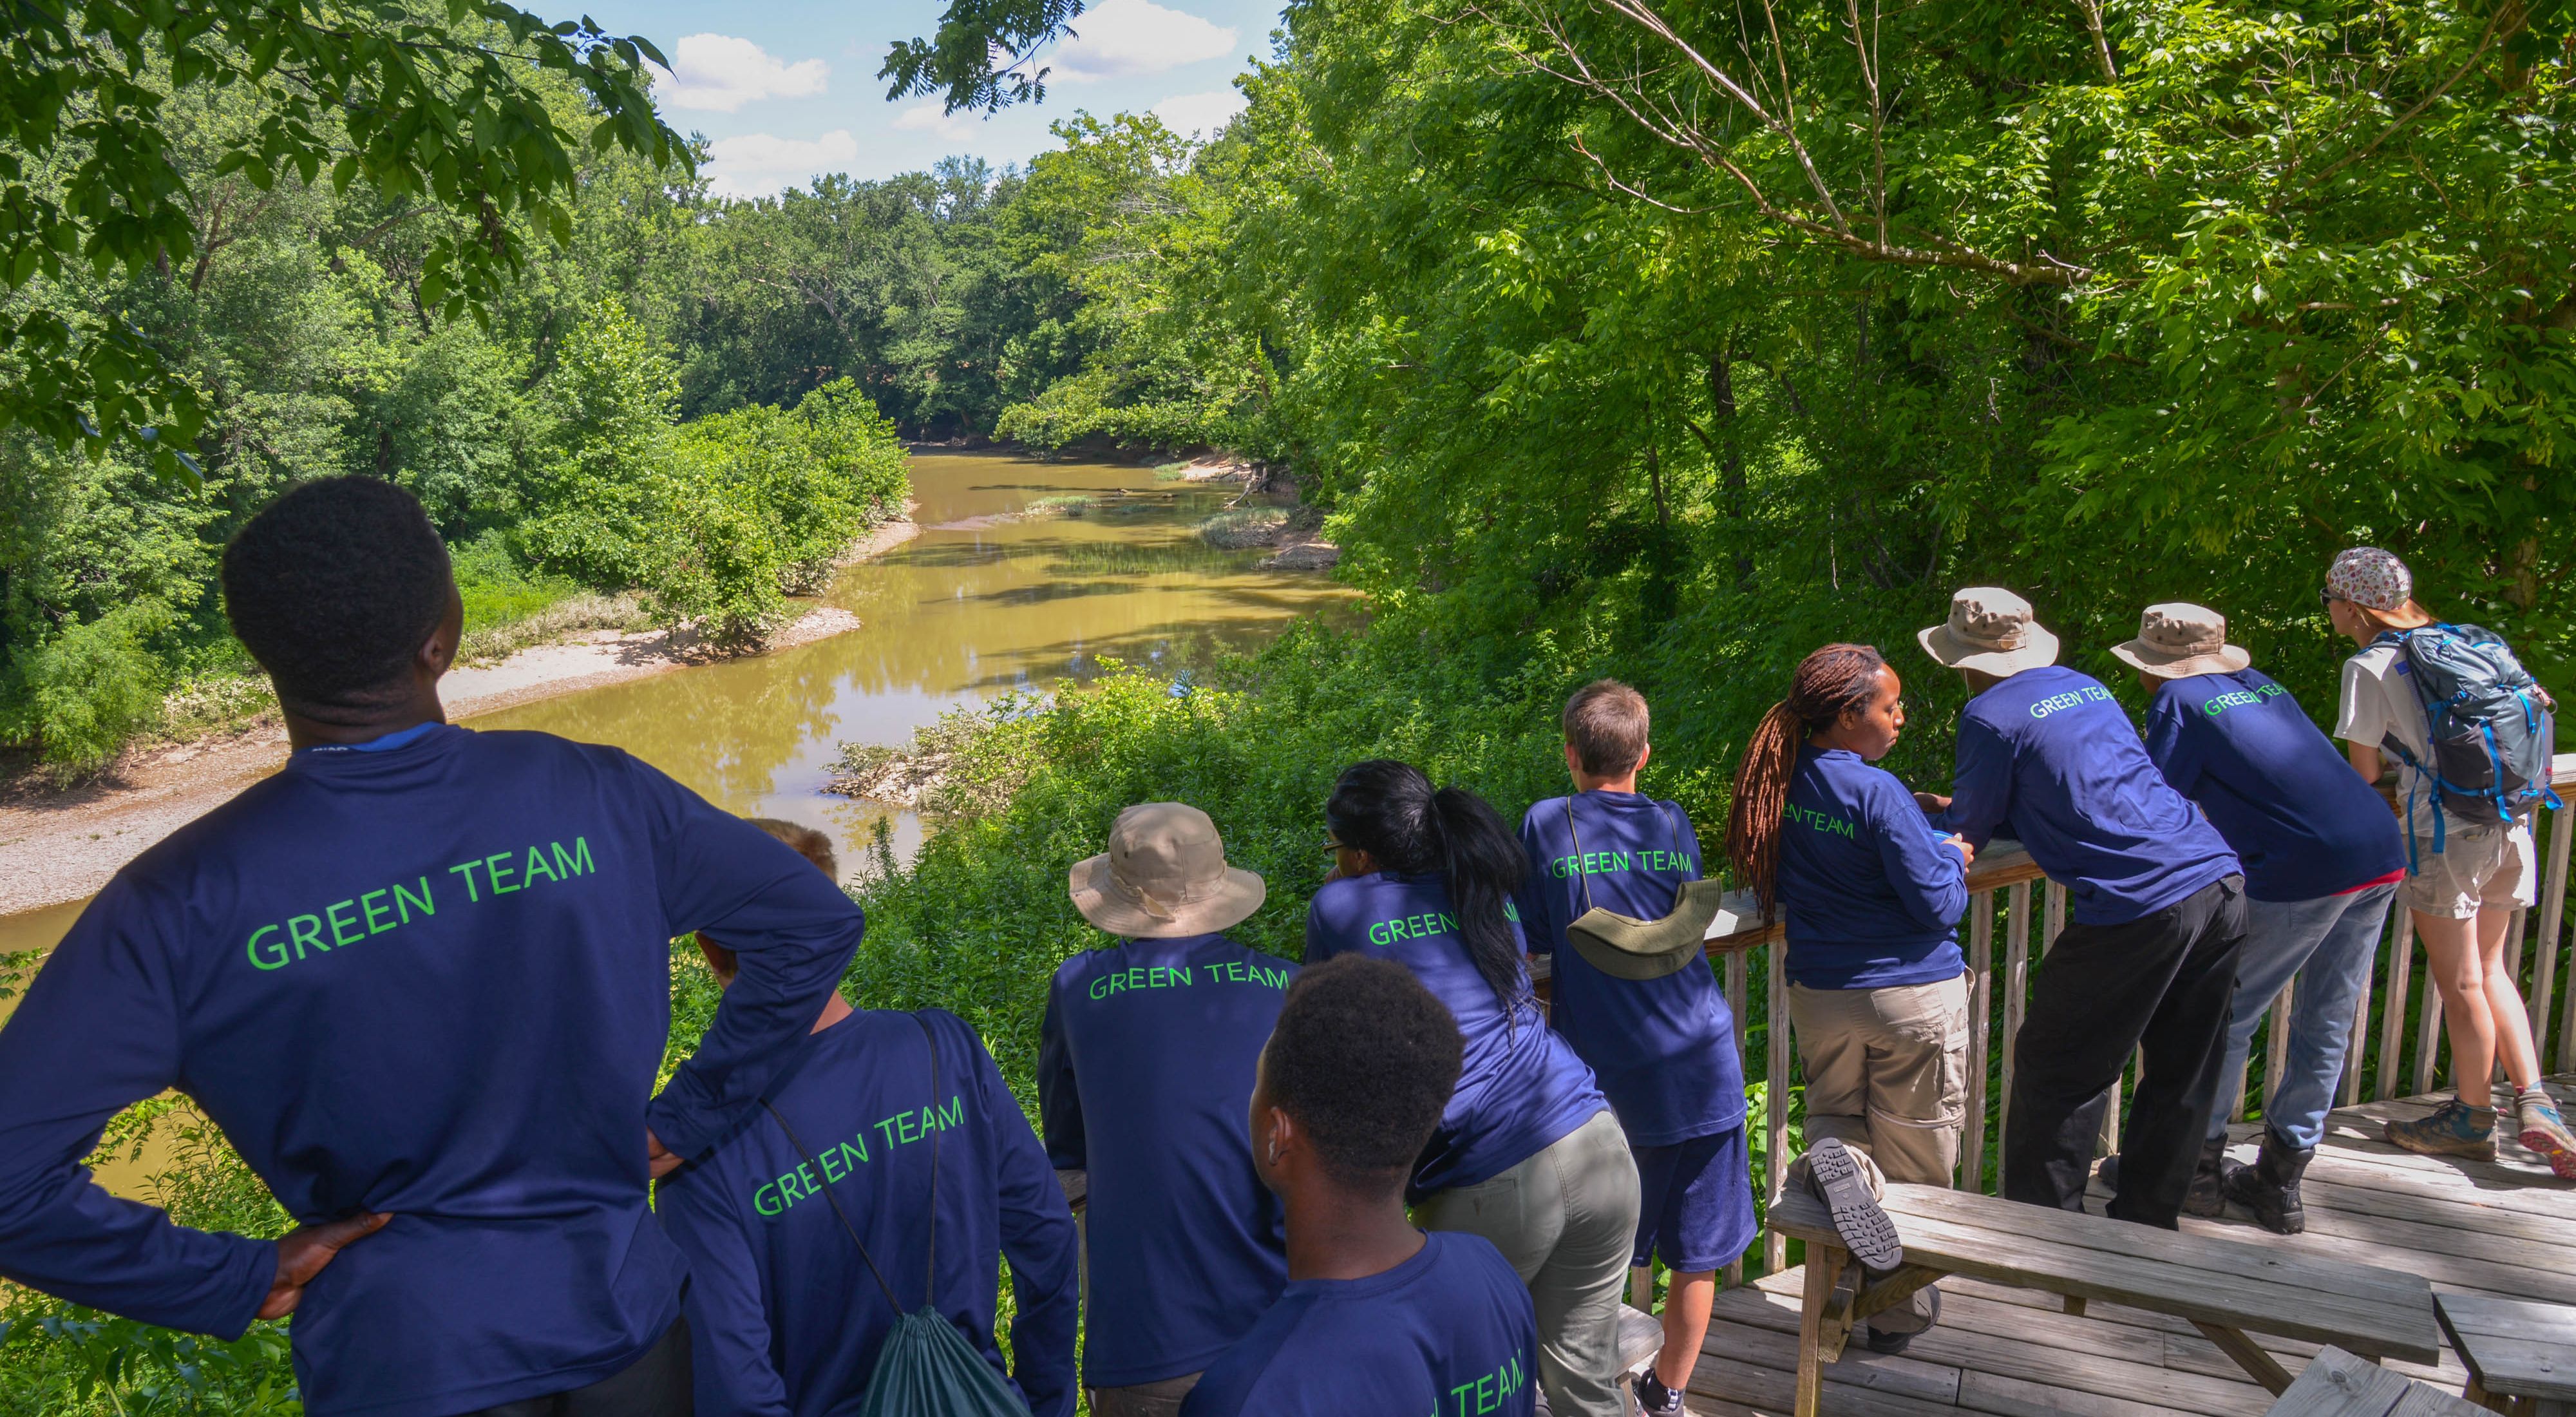 A row of teenagers in matching blue shirts stand along a wooden rail overlooking a river, surrounded by lush, green leaves.